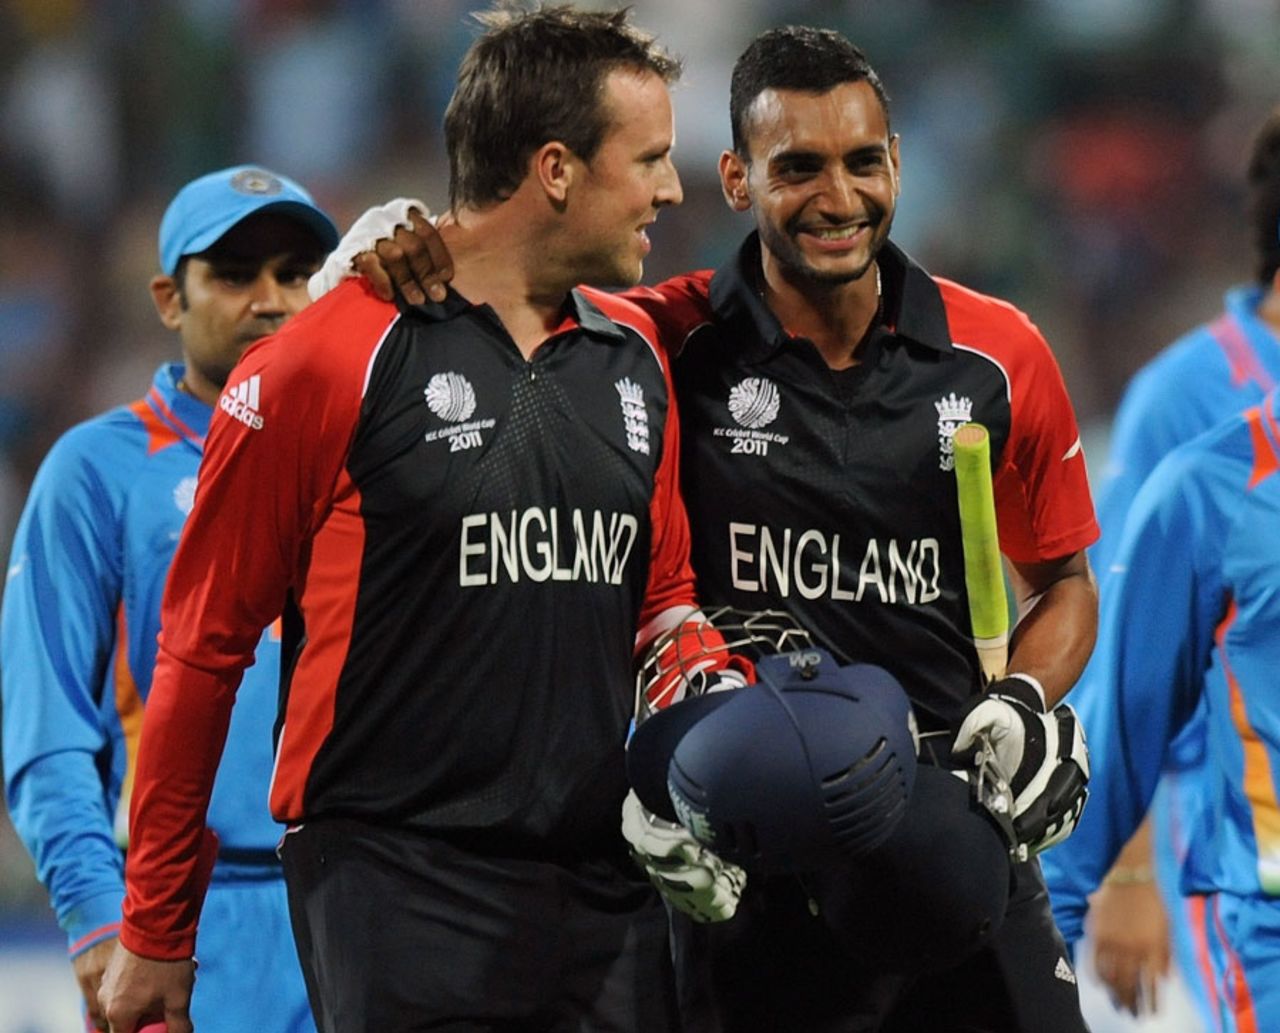 Graeme Swann and Ajmal Shahzad walk off after earning a tie, India v England, World Cup, Group B, Bangalore, February 27, 2011